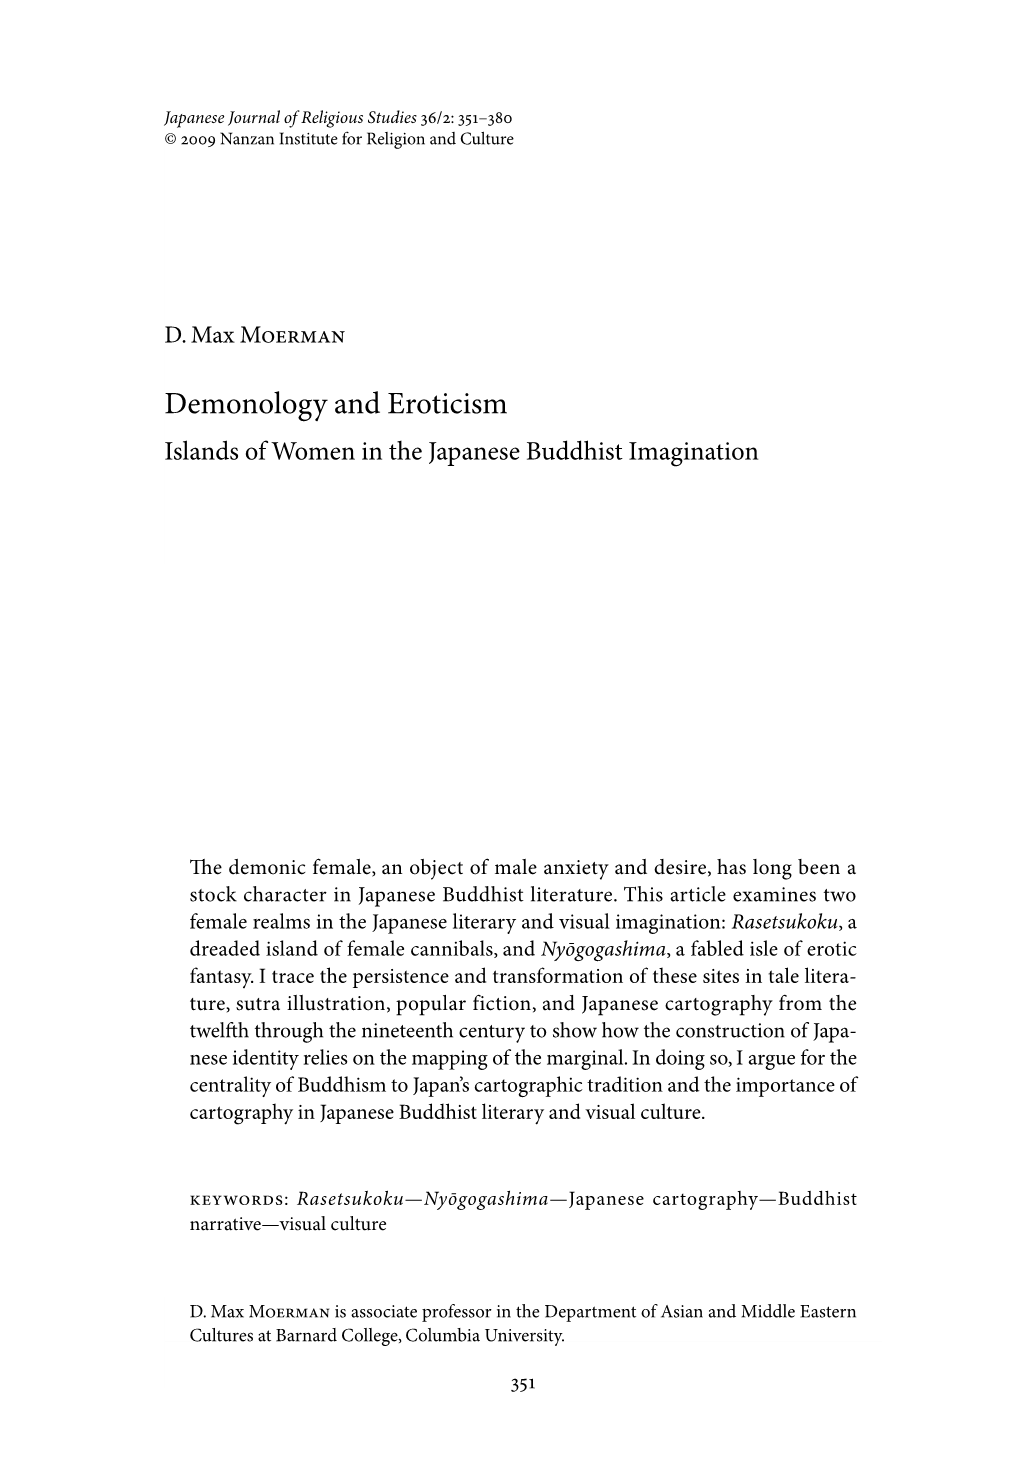 Demonology and Eroticism Islands of Women in the Japanese Buddhist Imagination